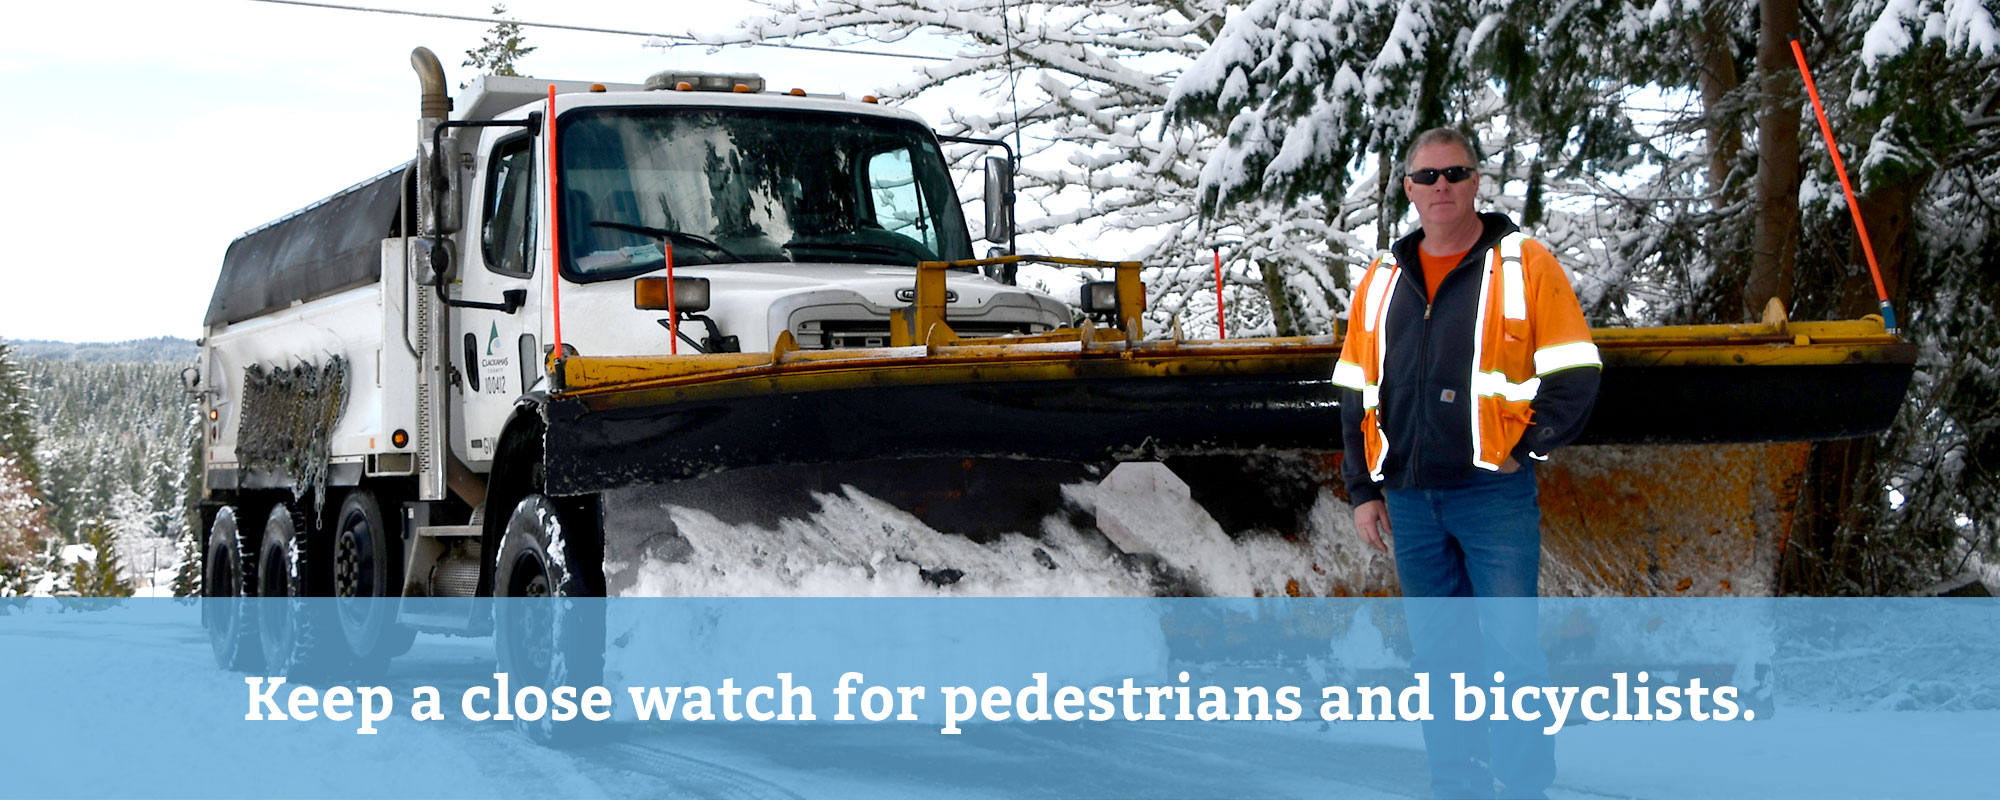 Keep a close watch for pedestrians and bicyclists.